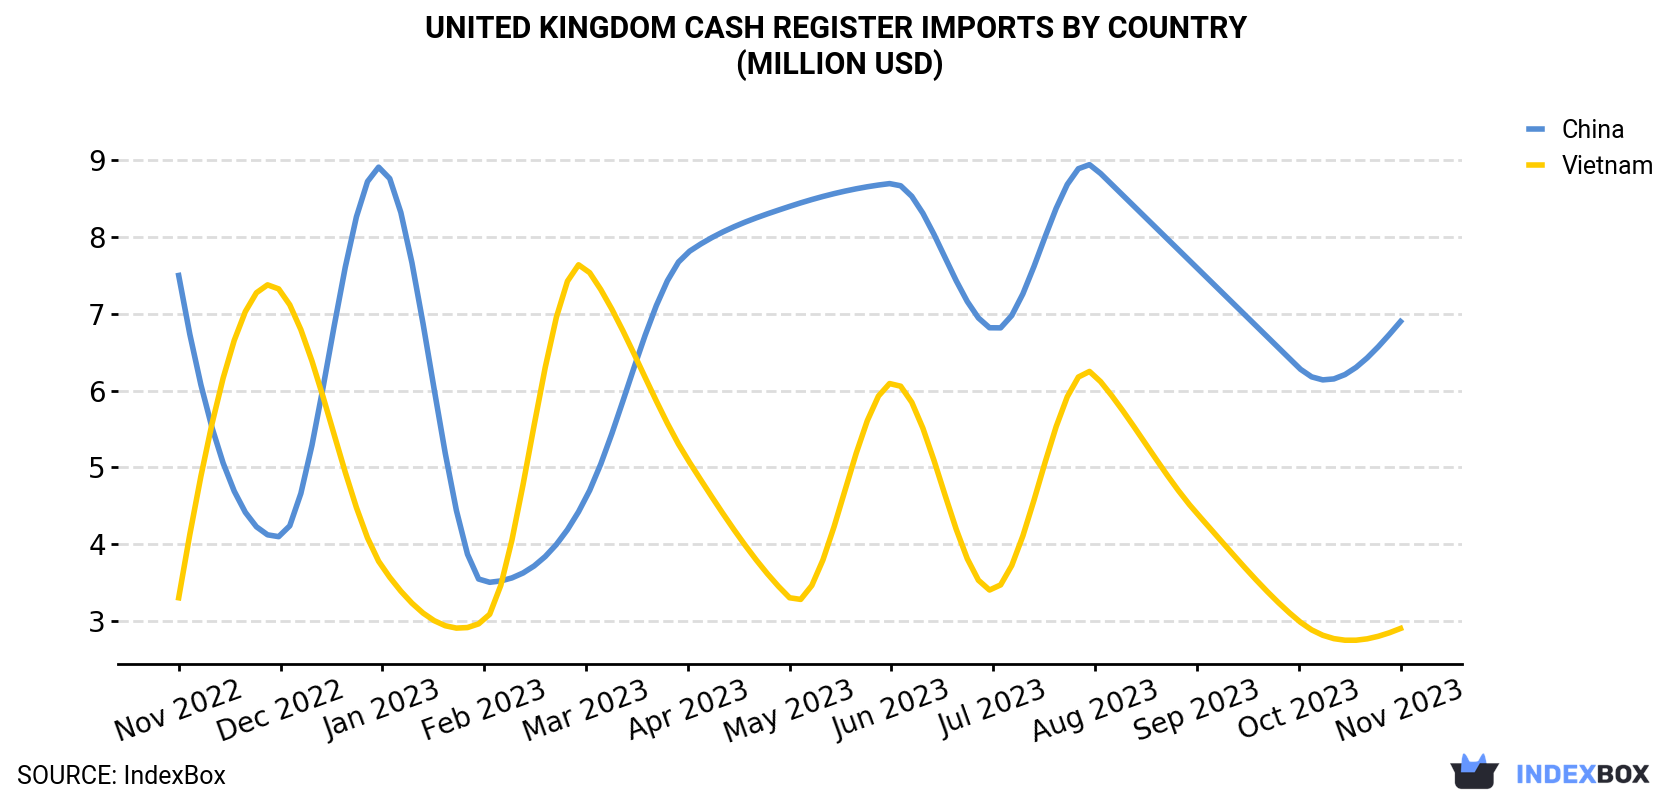 United Kingdom Cash Register Imports By Country (Million USD)